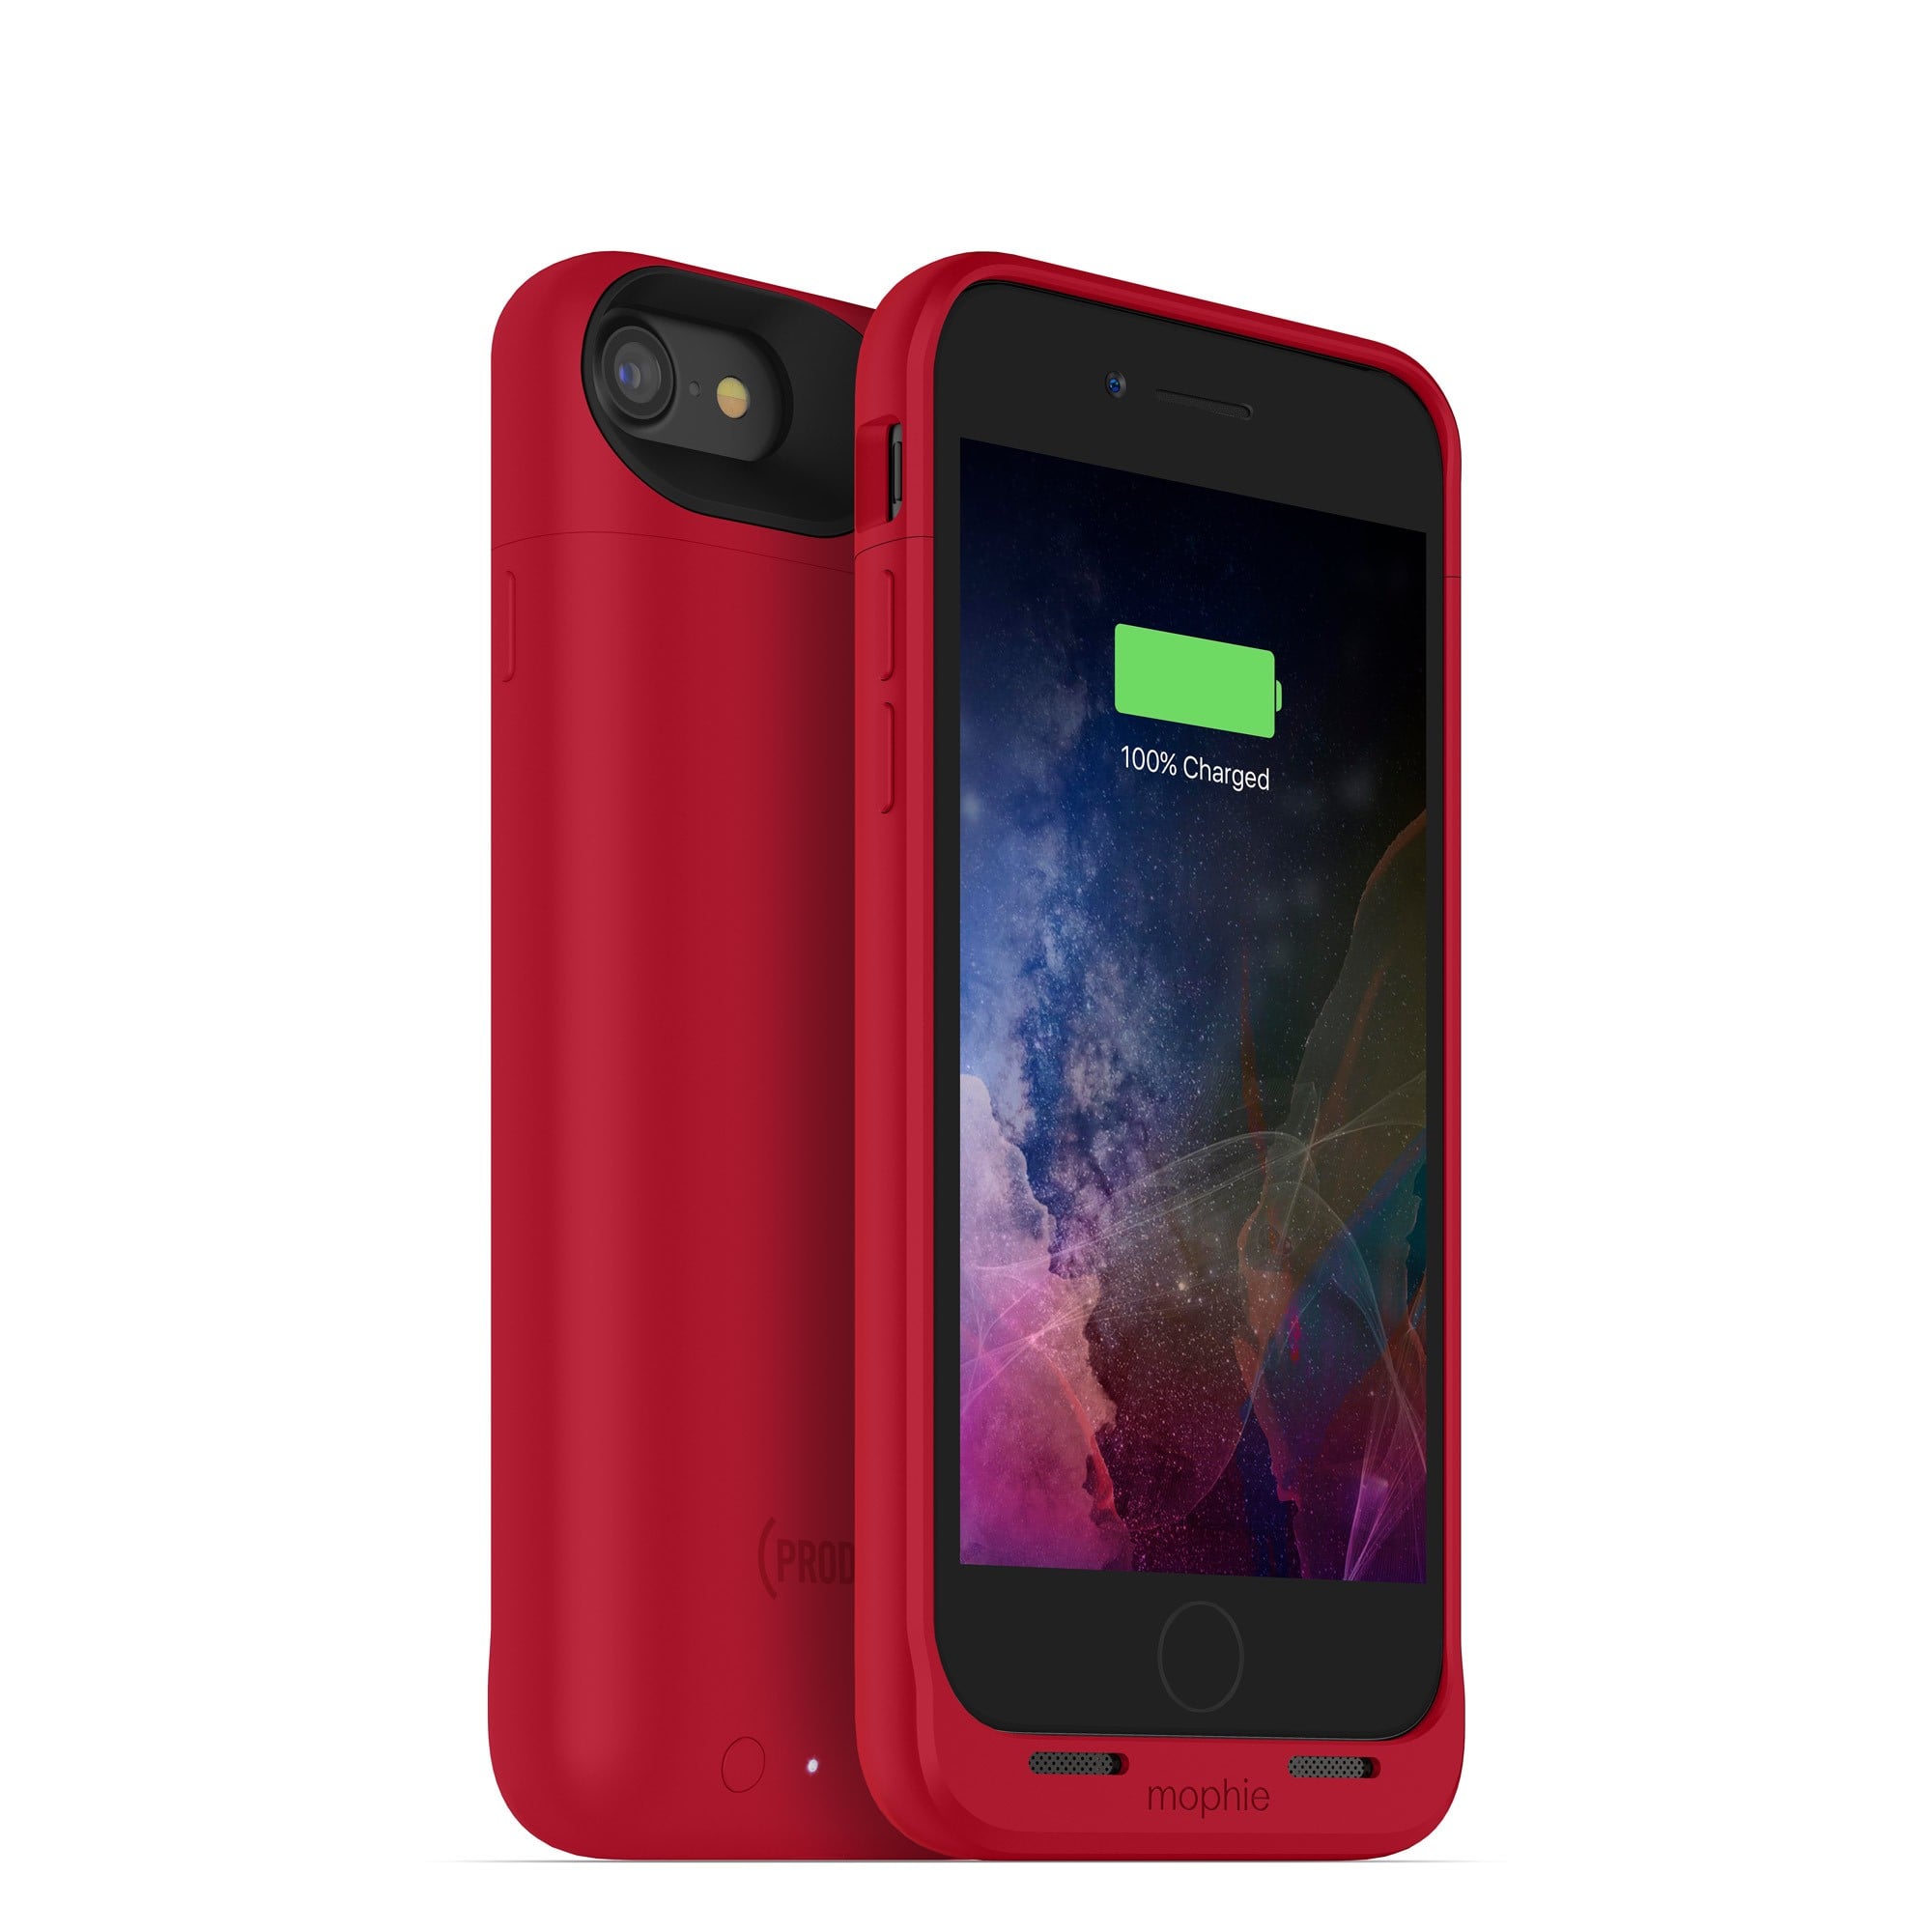 mophie、接触式のワイヤレス充電に対応したバッテリー内蔵ケース「juice pack air for iPhone7/7Plus